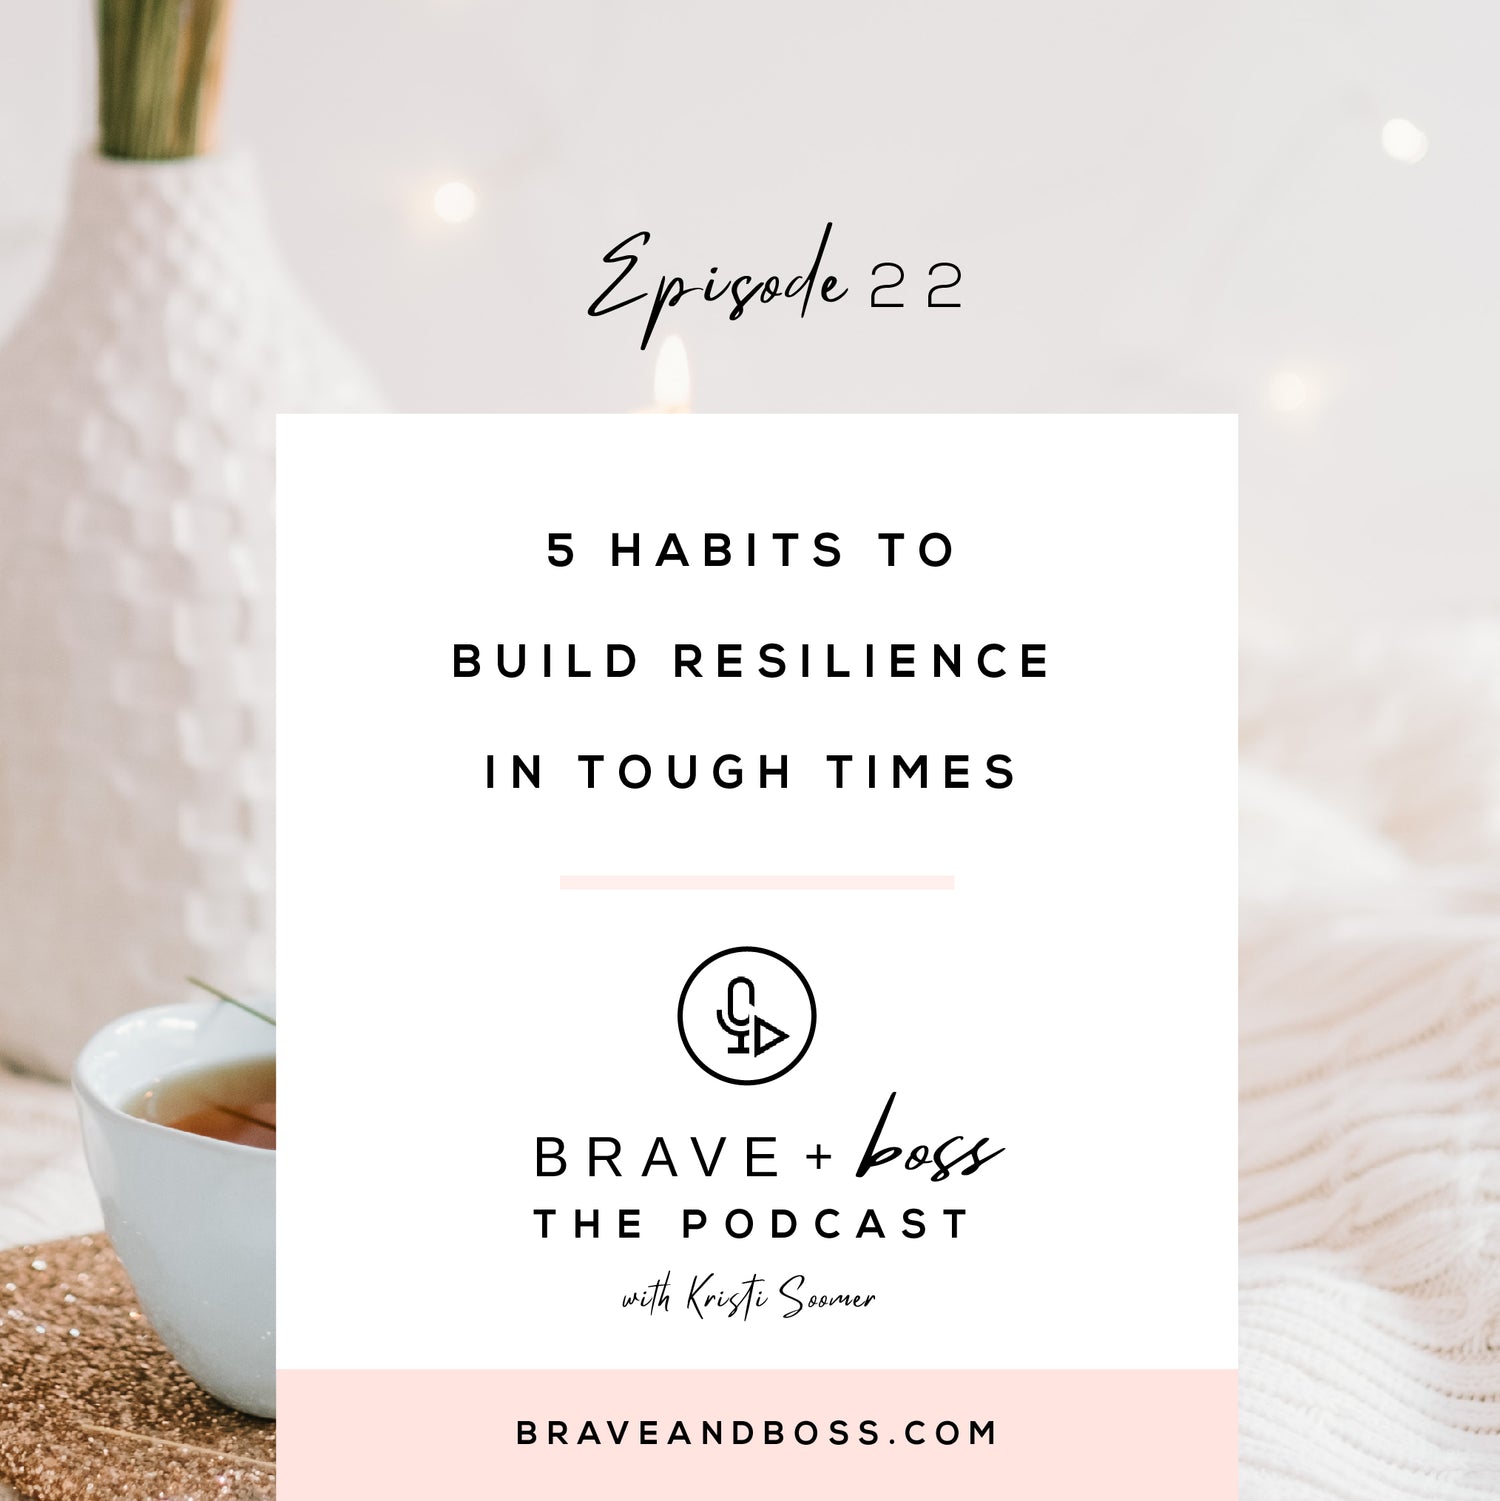 5 Habits to Build Resilience in Tough Times